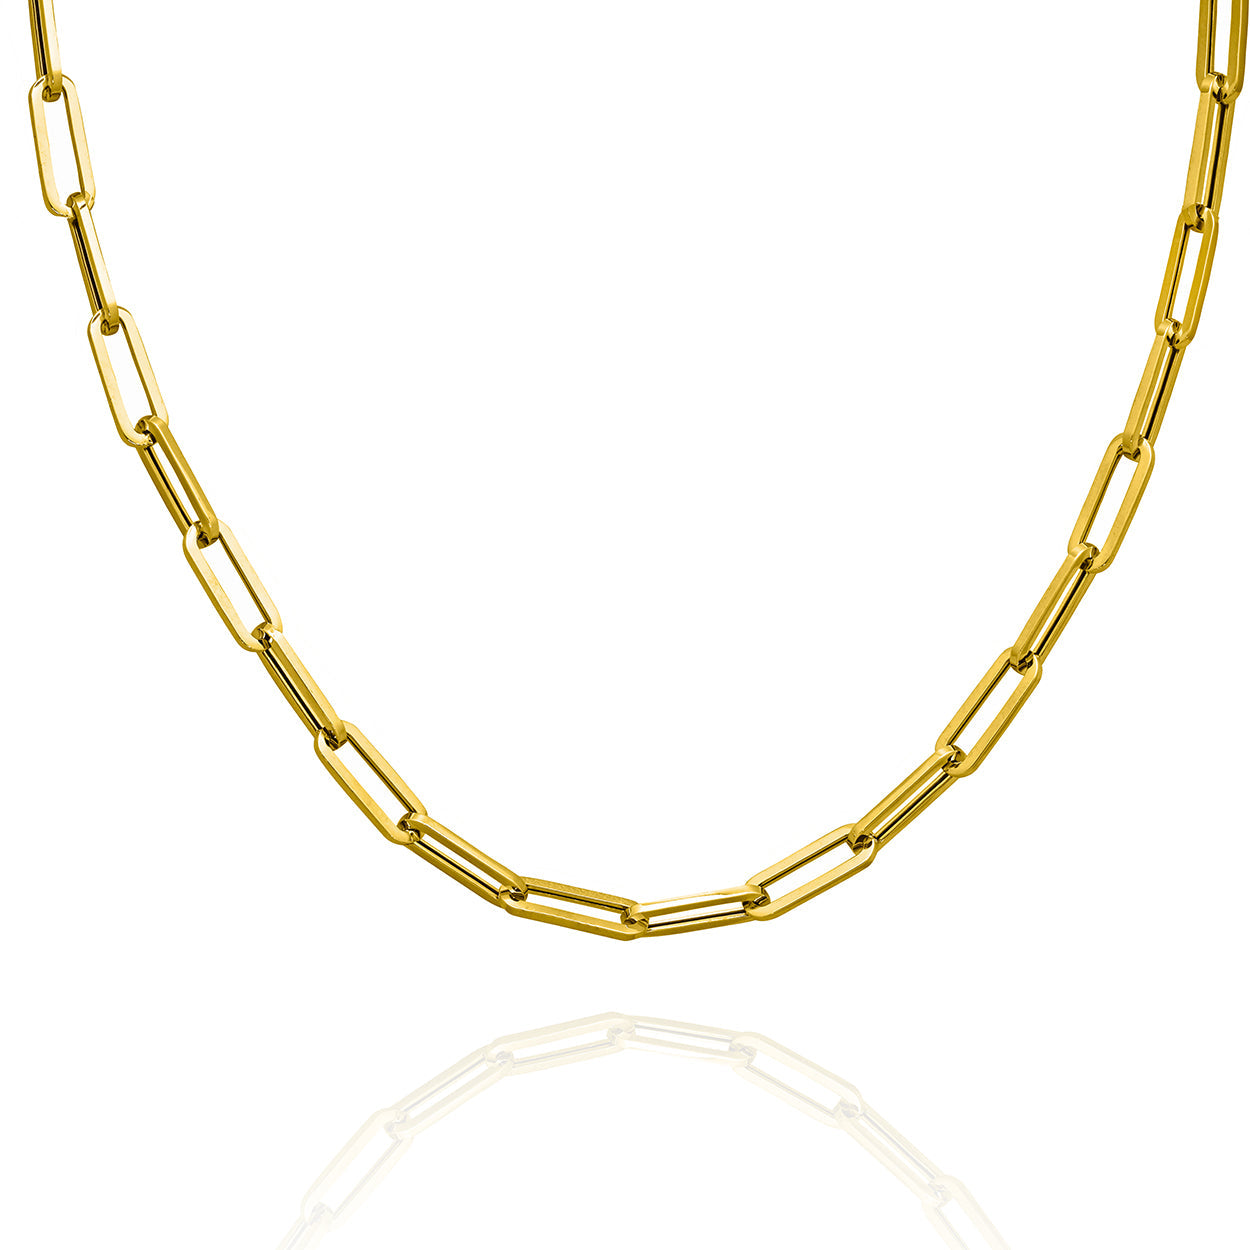 10KT Solid Gold Paper Clip Style Chain 4mm Wide